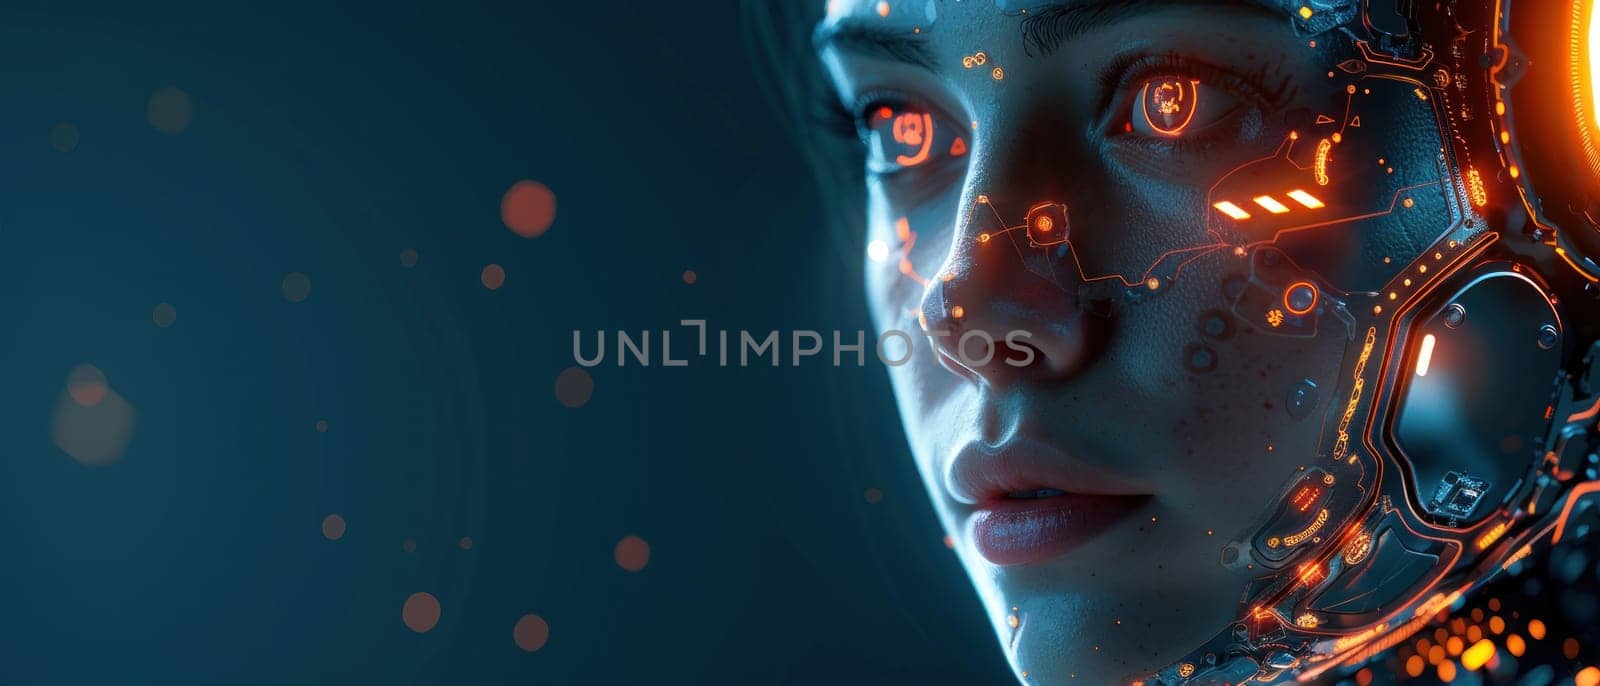 A cyborg face is covered in glowing red sparks.